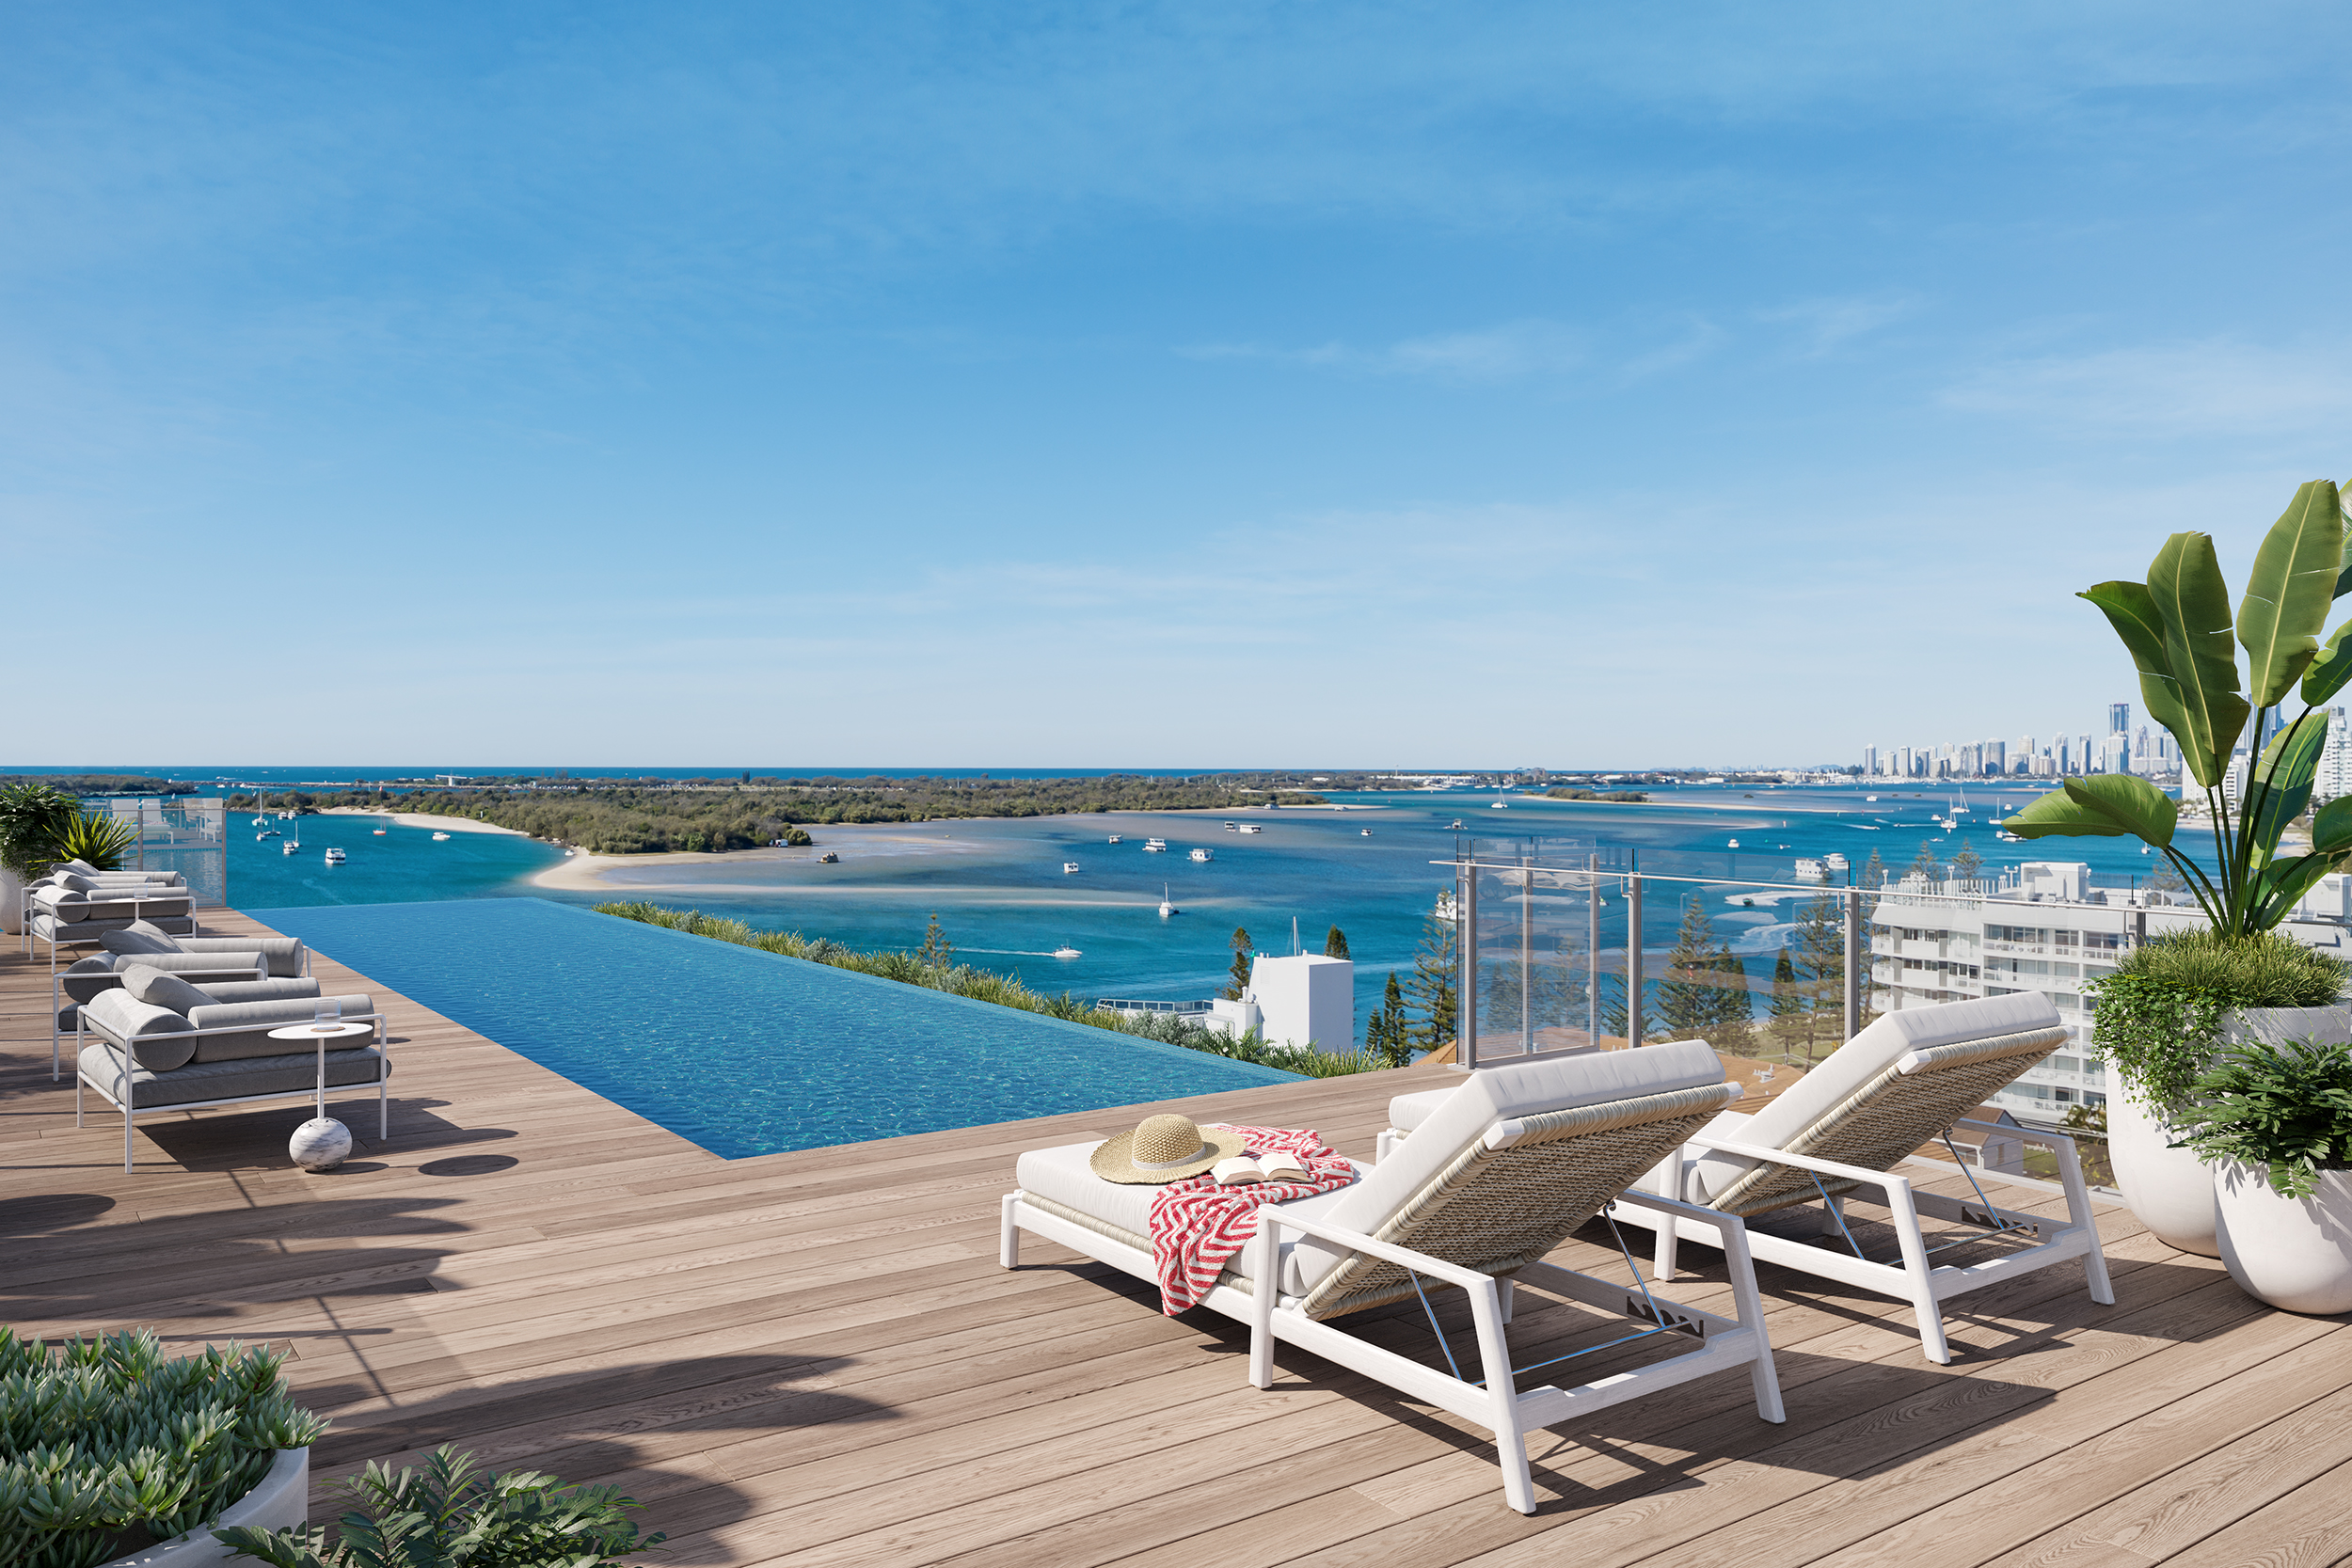 Breathtaking view from an infinity pool overlooking the ocean and the magnificent Gold Coast skyline. The poolside deck features a stylish timber finish and inviting lounge chairs.